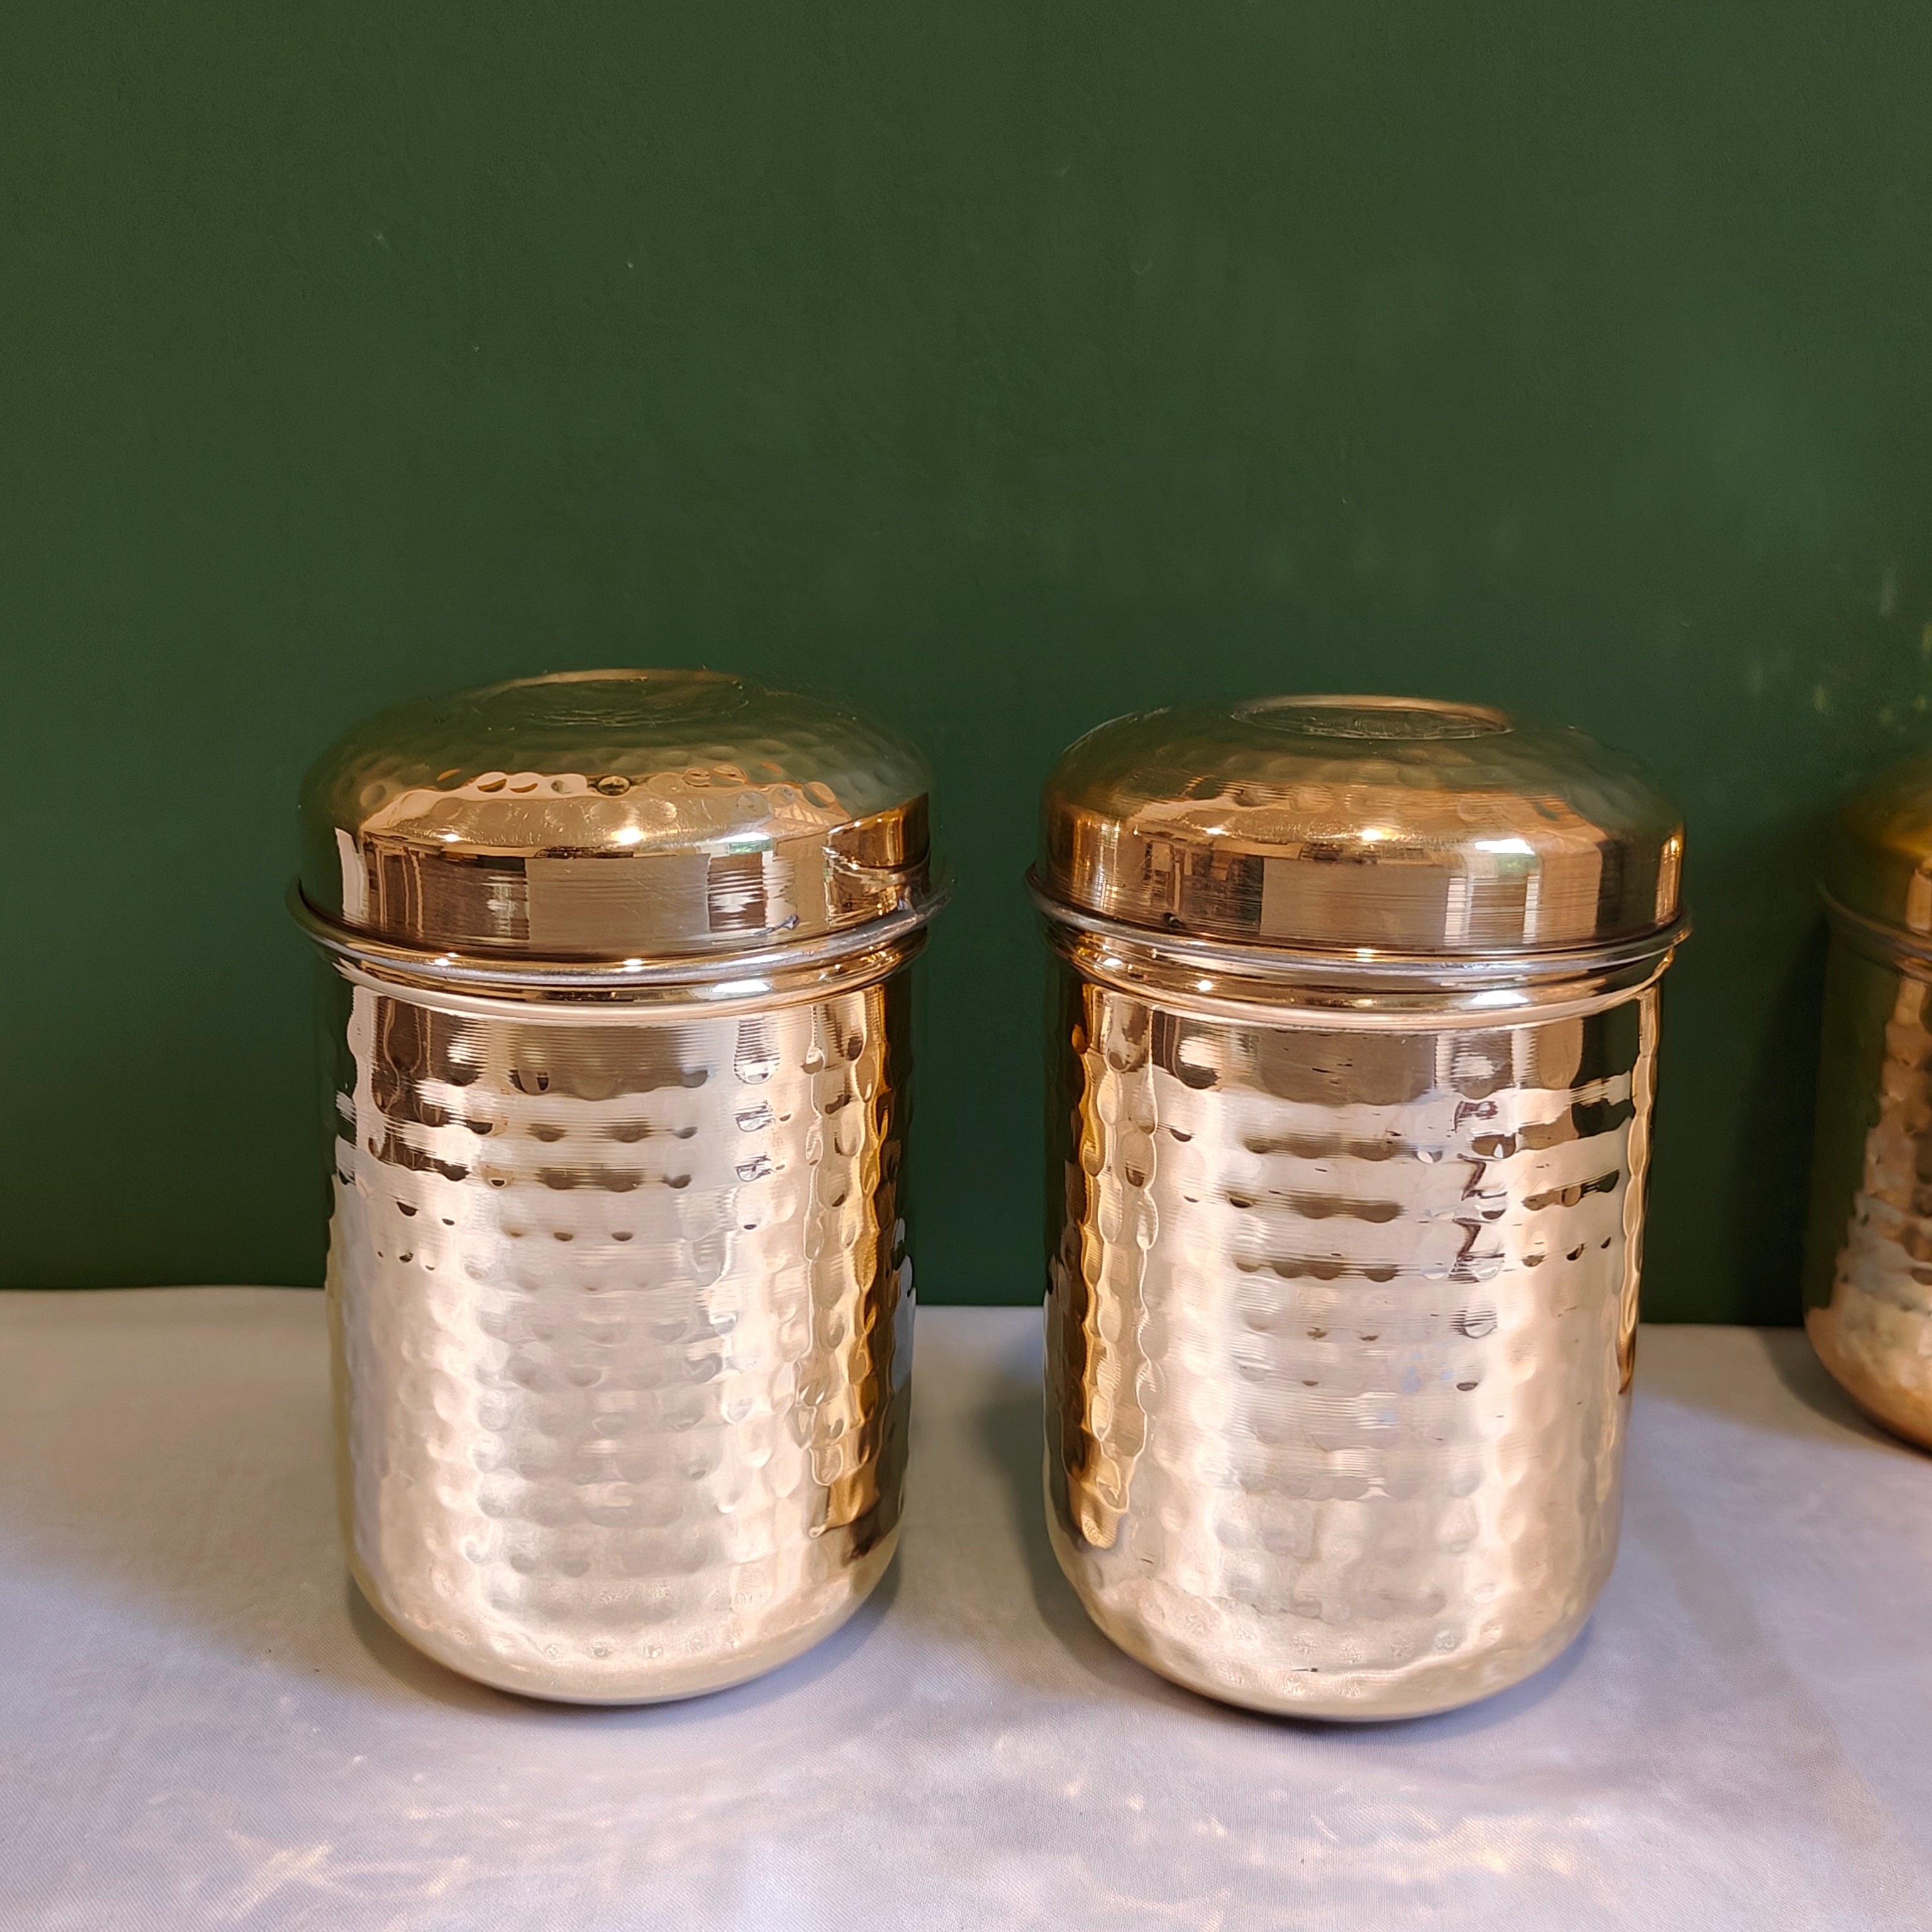 https://zishta.com/cdn/shop/products/brass-storage-canister-hammered-small-set-of-2-1-zishta-storage-containers.jpg?v=1680263510&width=3072